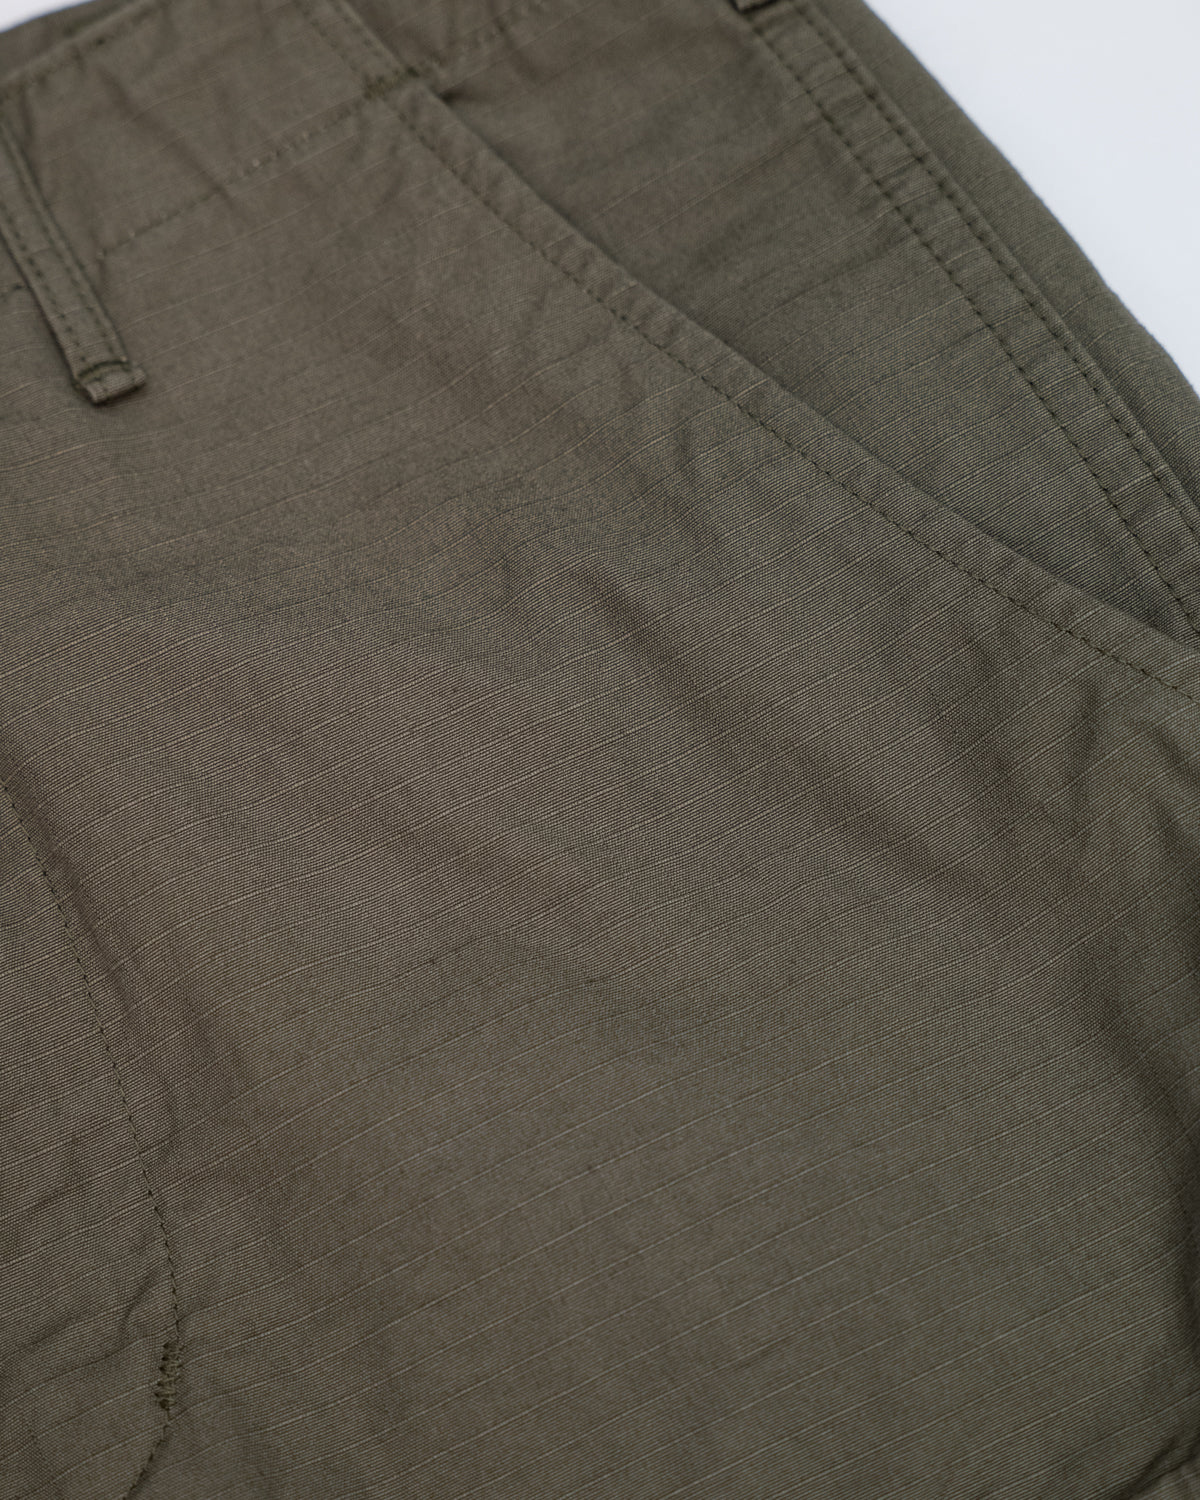 01-5260RIP -76- 6-Pocket Cargo Trousers - Slim Fit - Olive